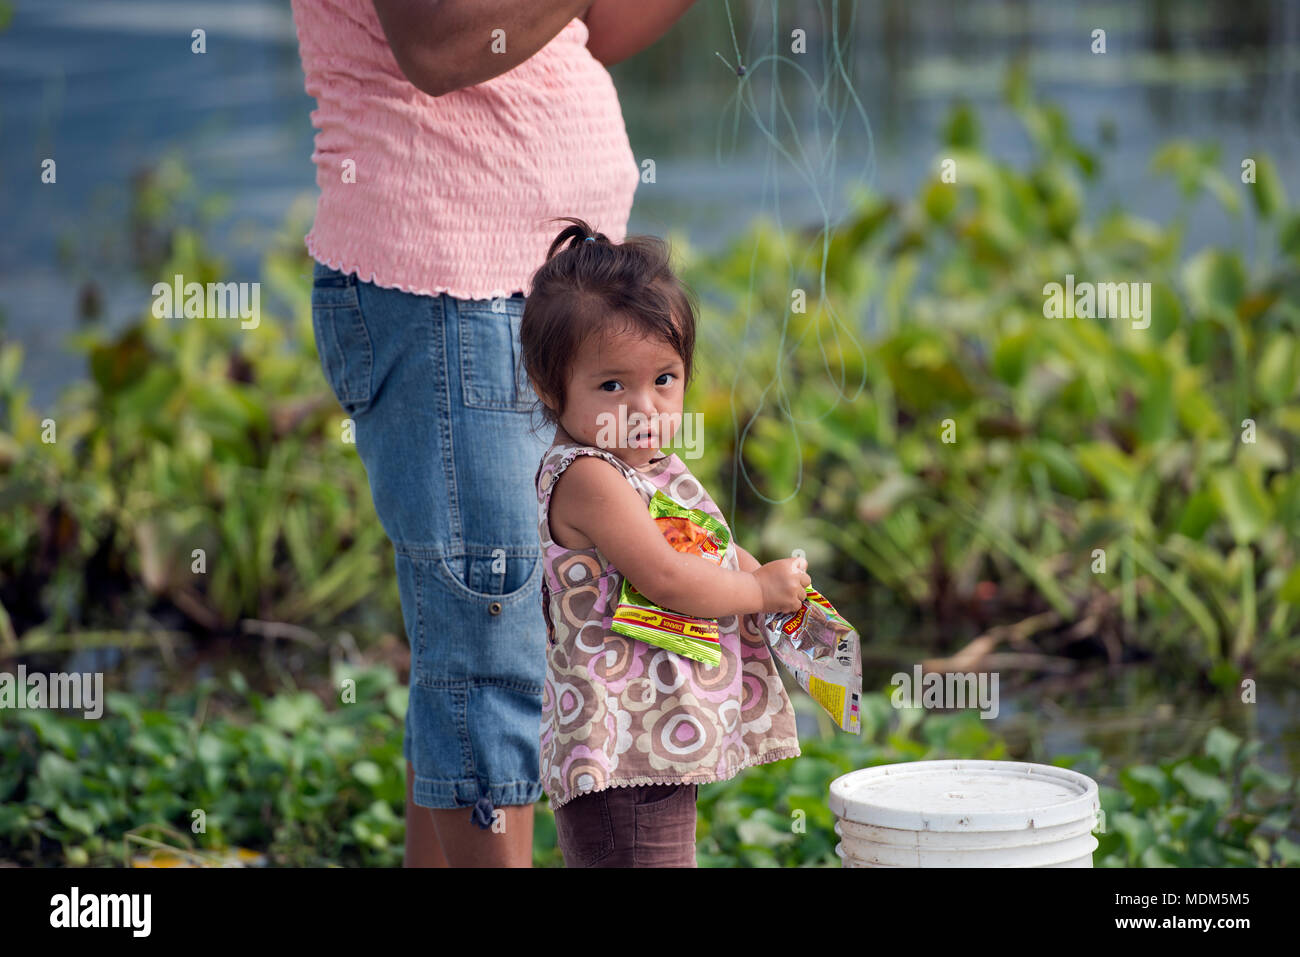 A young, indigenous Itza Maya girl eats candy while her mother fishes in Lake Peten, northern Guatemala. Stock Photo